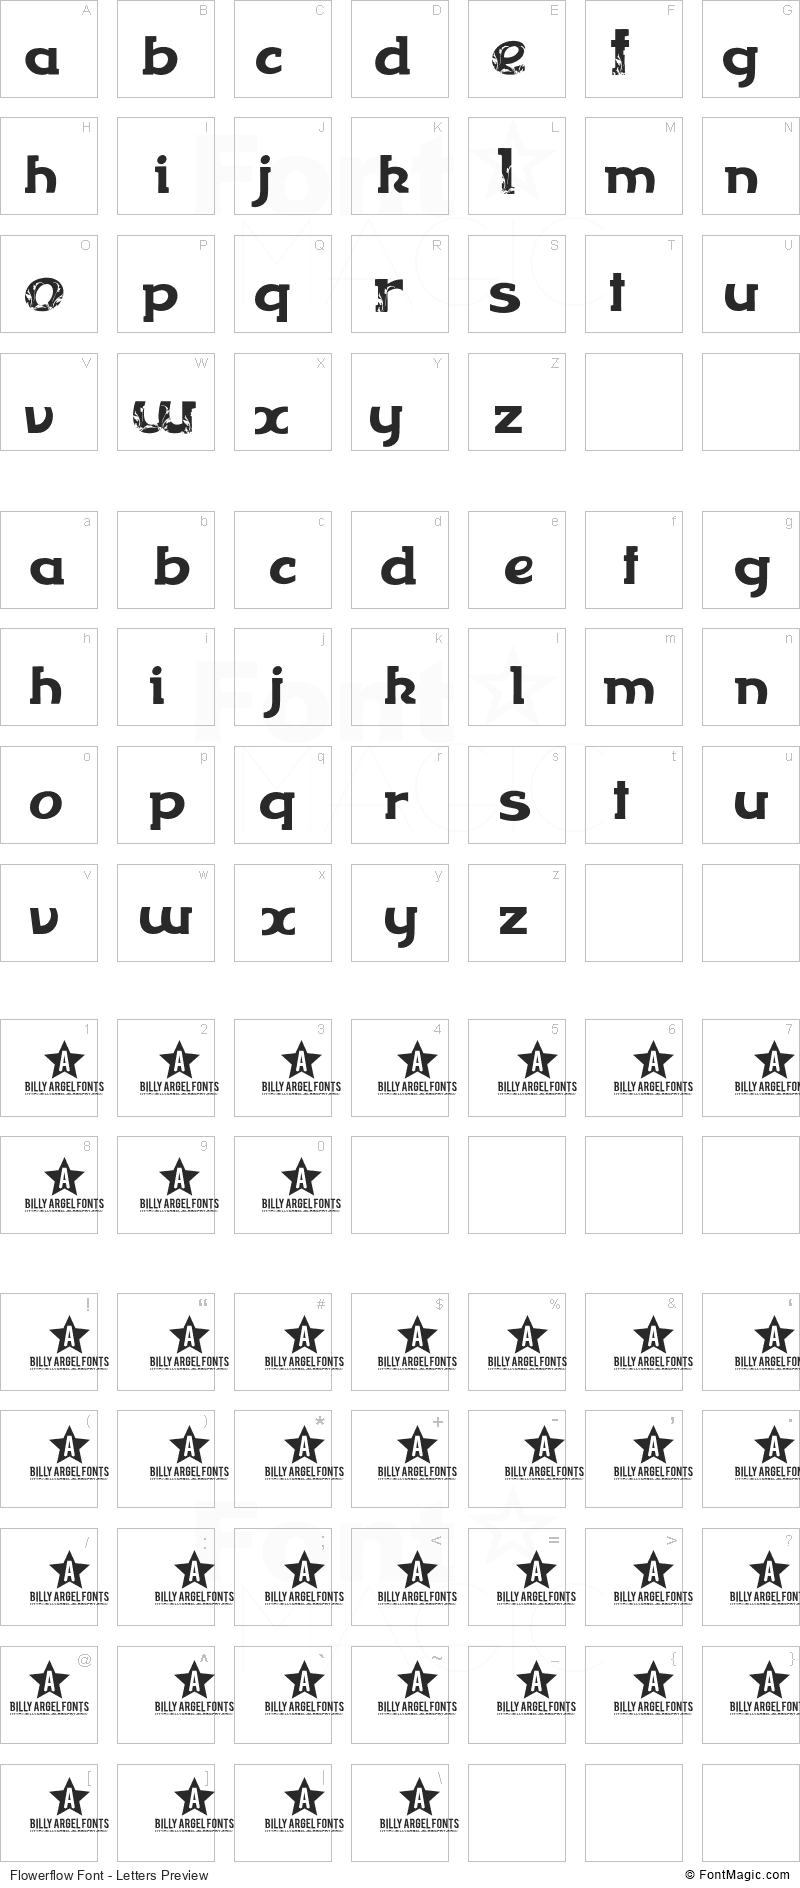 Flowerflow Font - All Latters Preview Chart